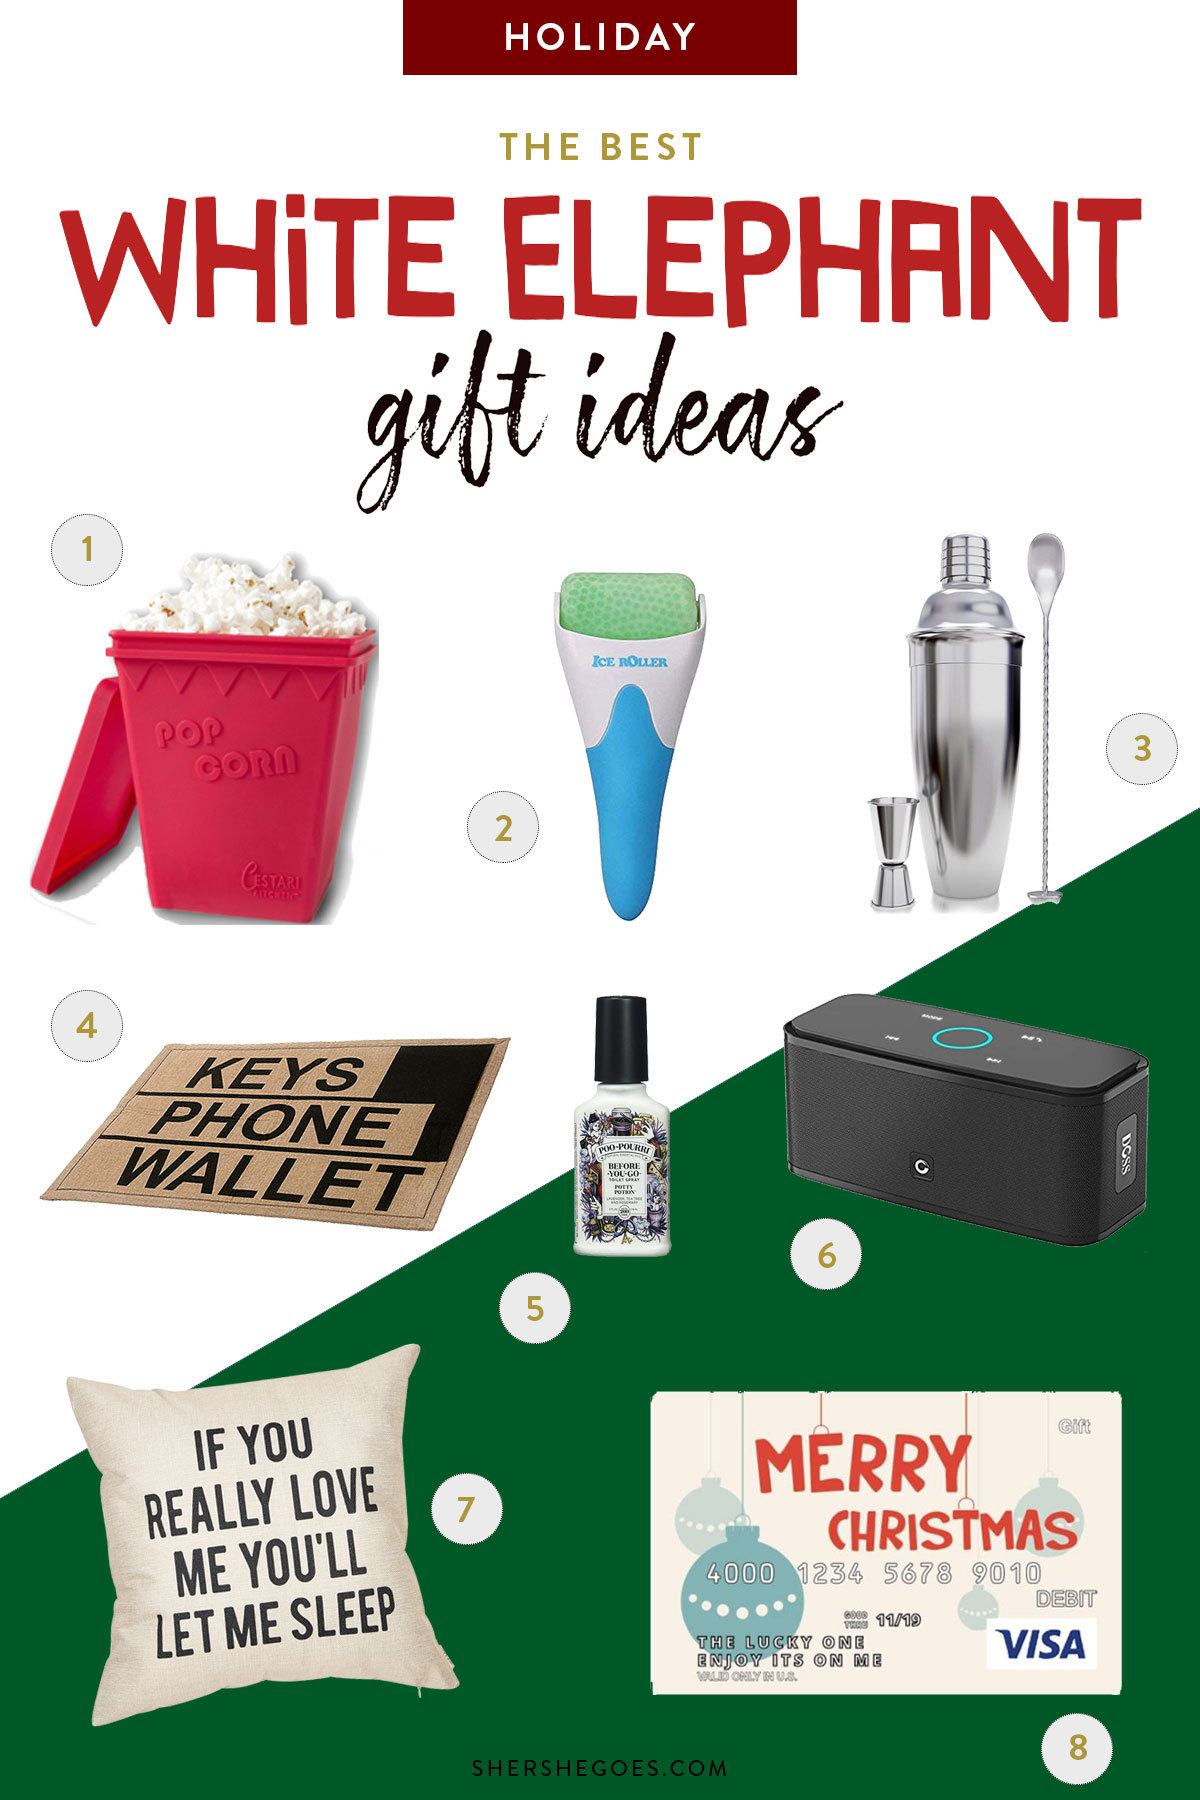 The Best Serious White Elephant Gift Ideas that Everyone Will Want!